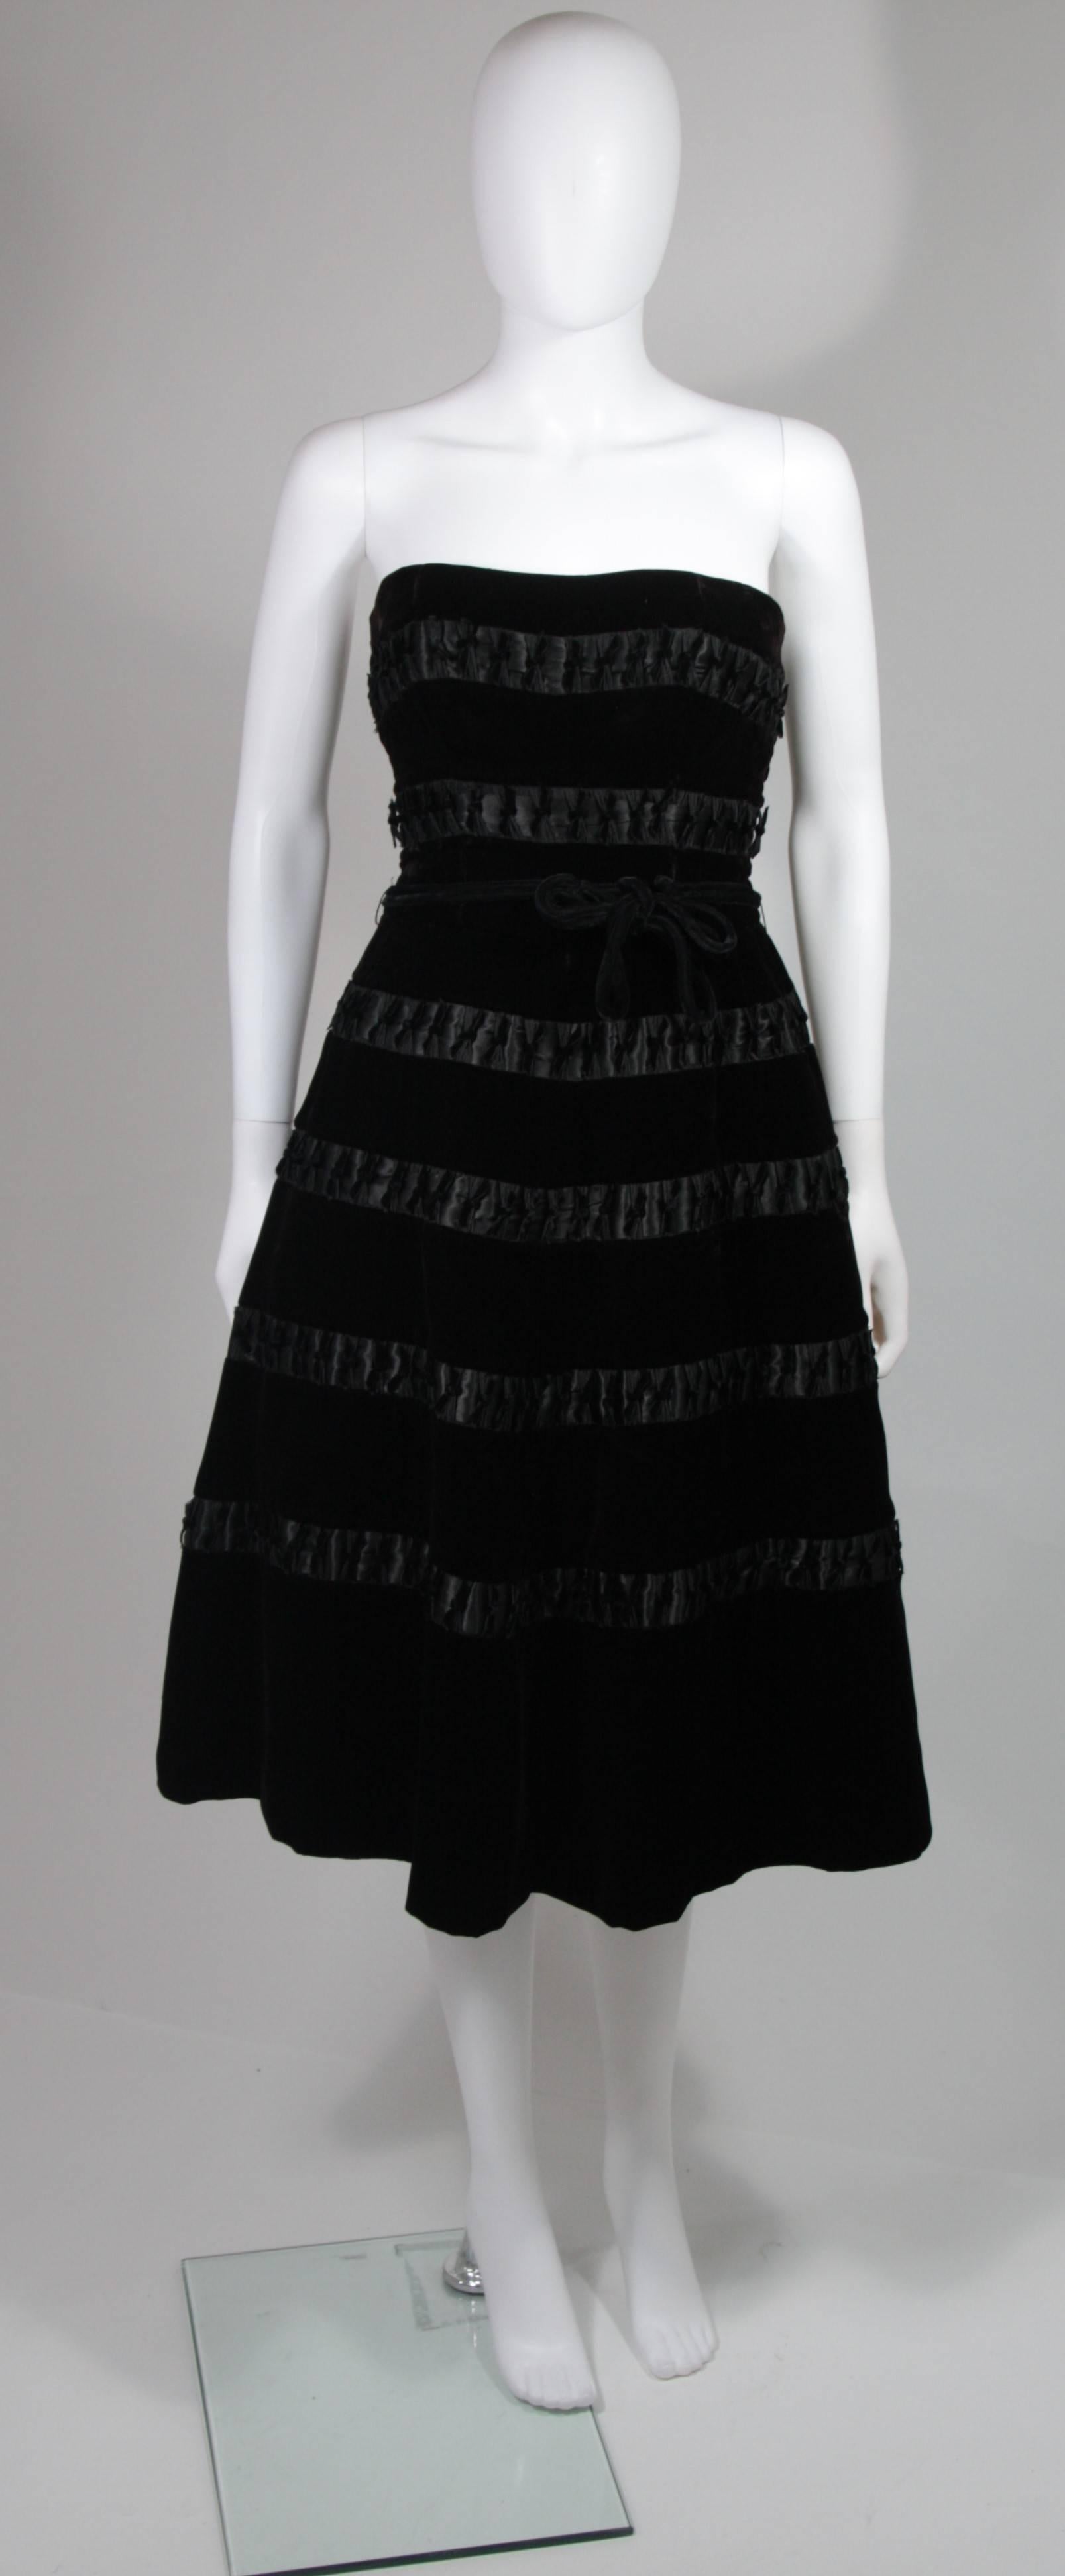 This Harvey Berin dress is composed of black velvet with satin accents. The dress features a flare style skirt and ribbon belt. There is a center back zipper closure. In excellent vintage condition. Made in USA.

**Please cross-reference